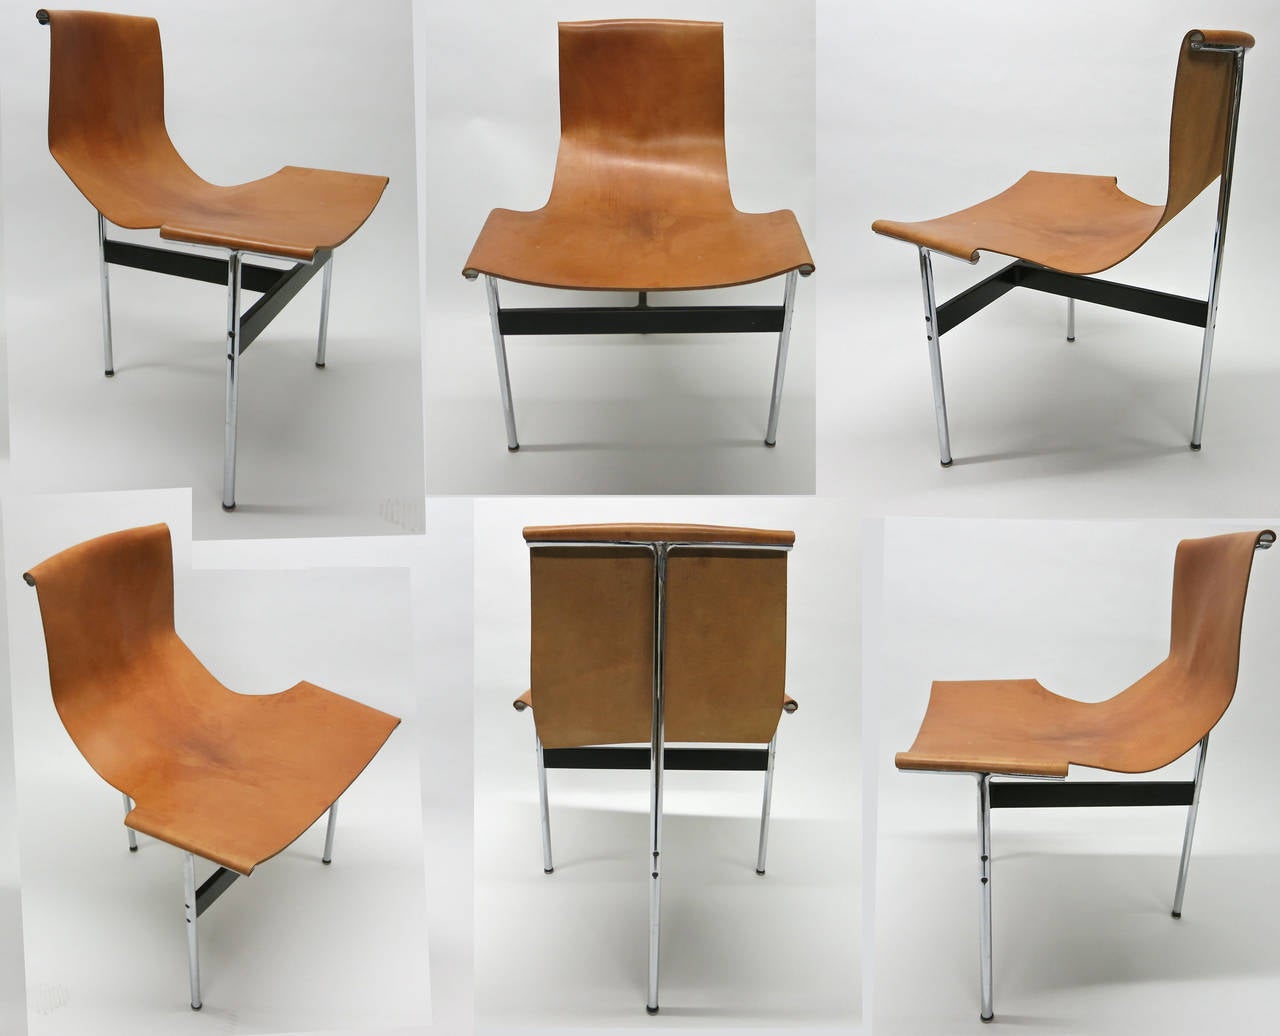 Six T Chairs in leather designed by William Katavolos, Ross Littel, and Douglas Kelly, in near perfect condition. 
All provenance available upon request.